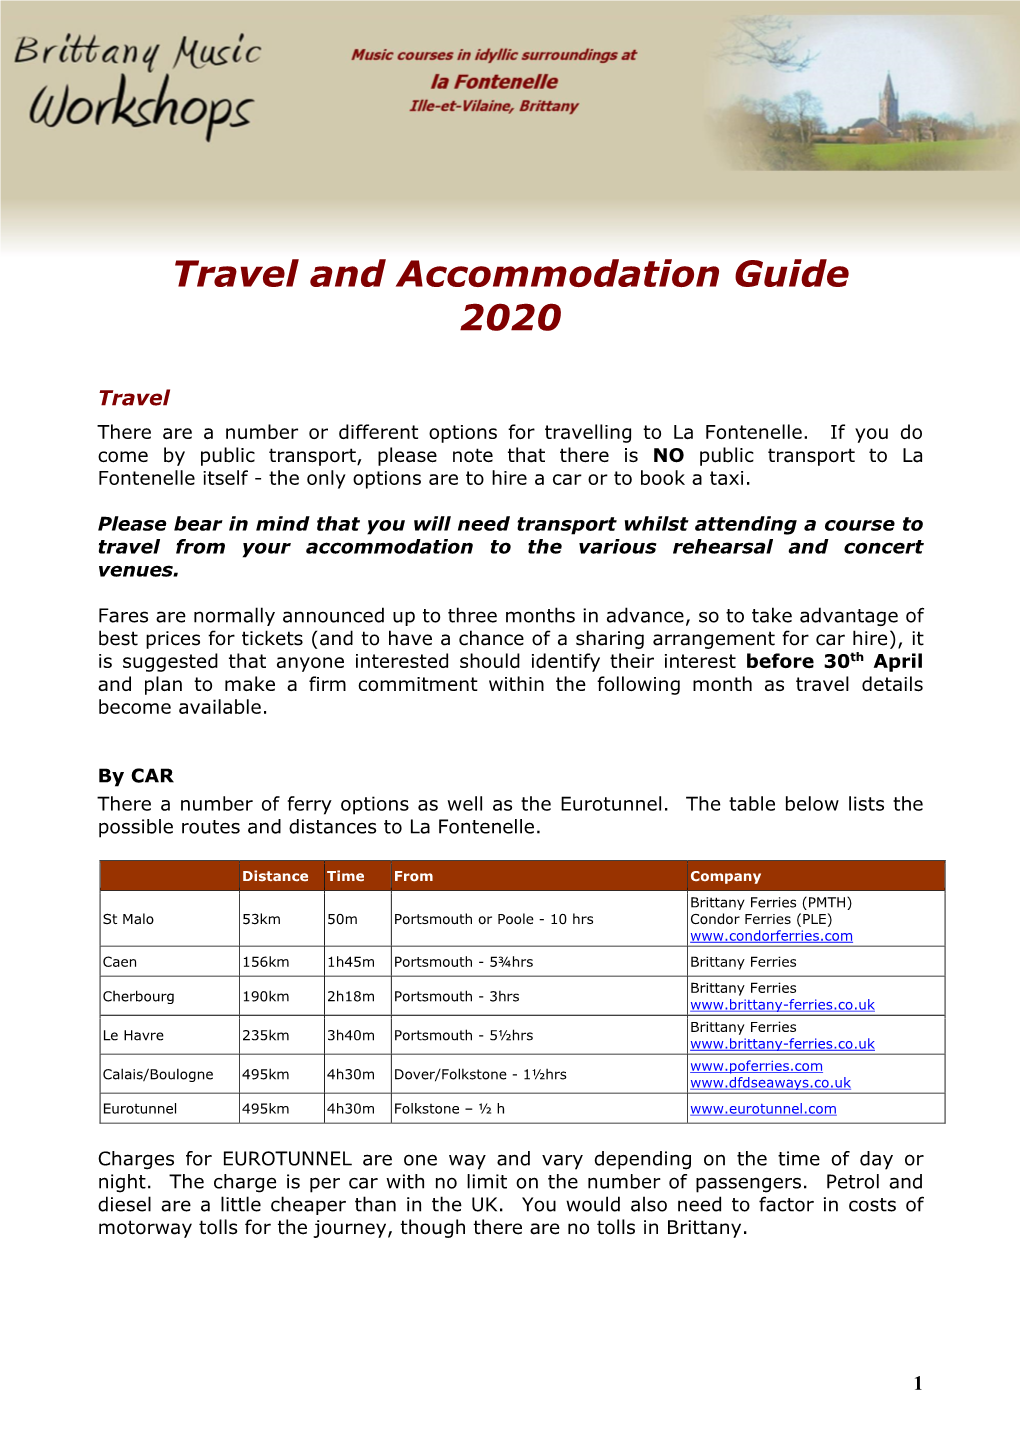 Travel and Accommodation Guide 2020